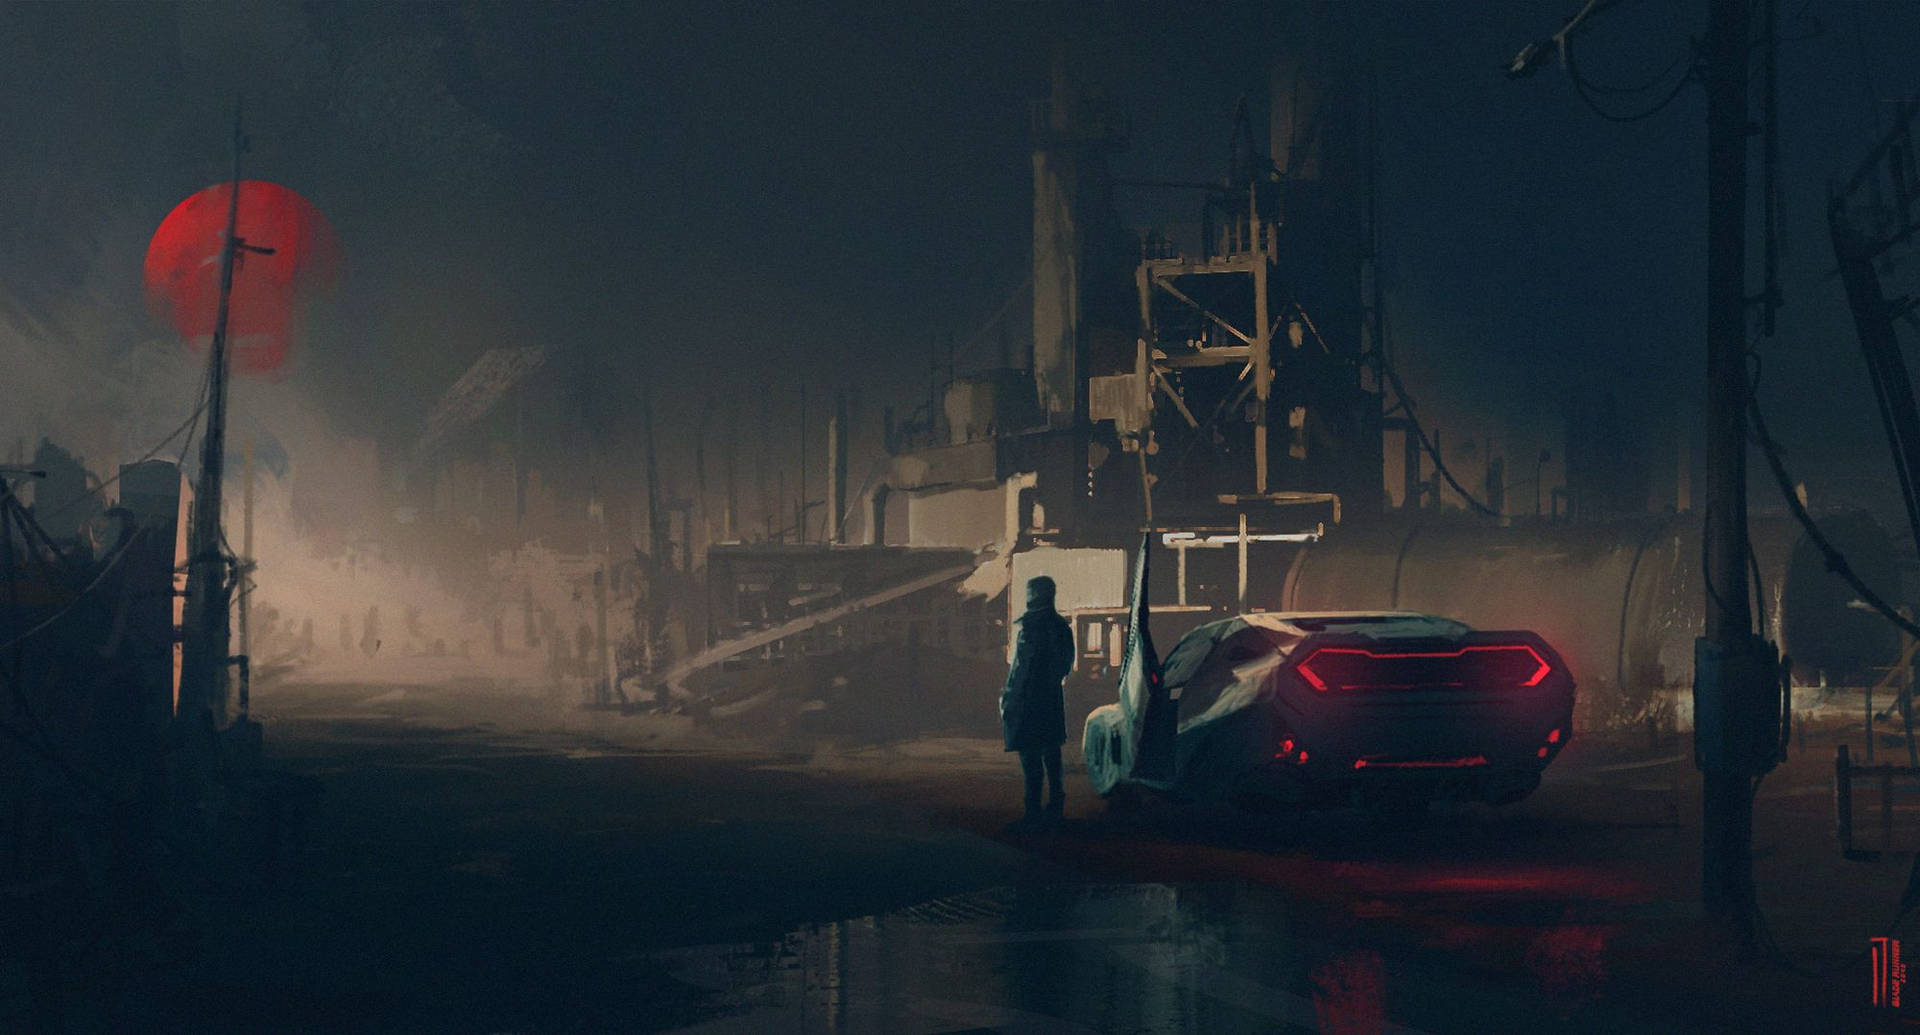 Blade Runner 2049 Wallpapers for Your iPhone and iPad